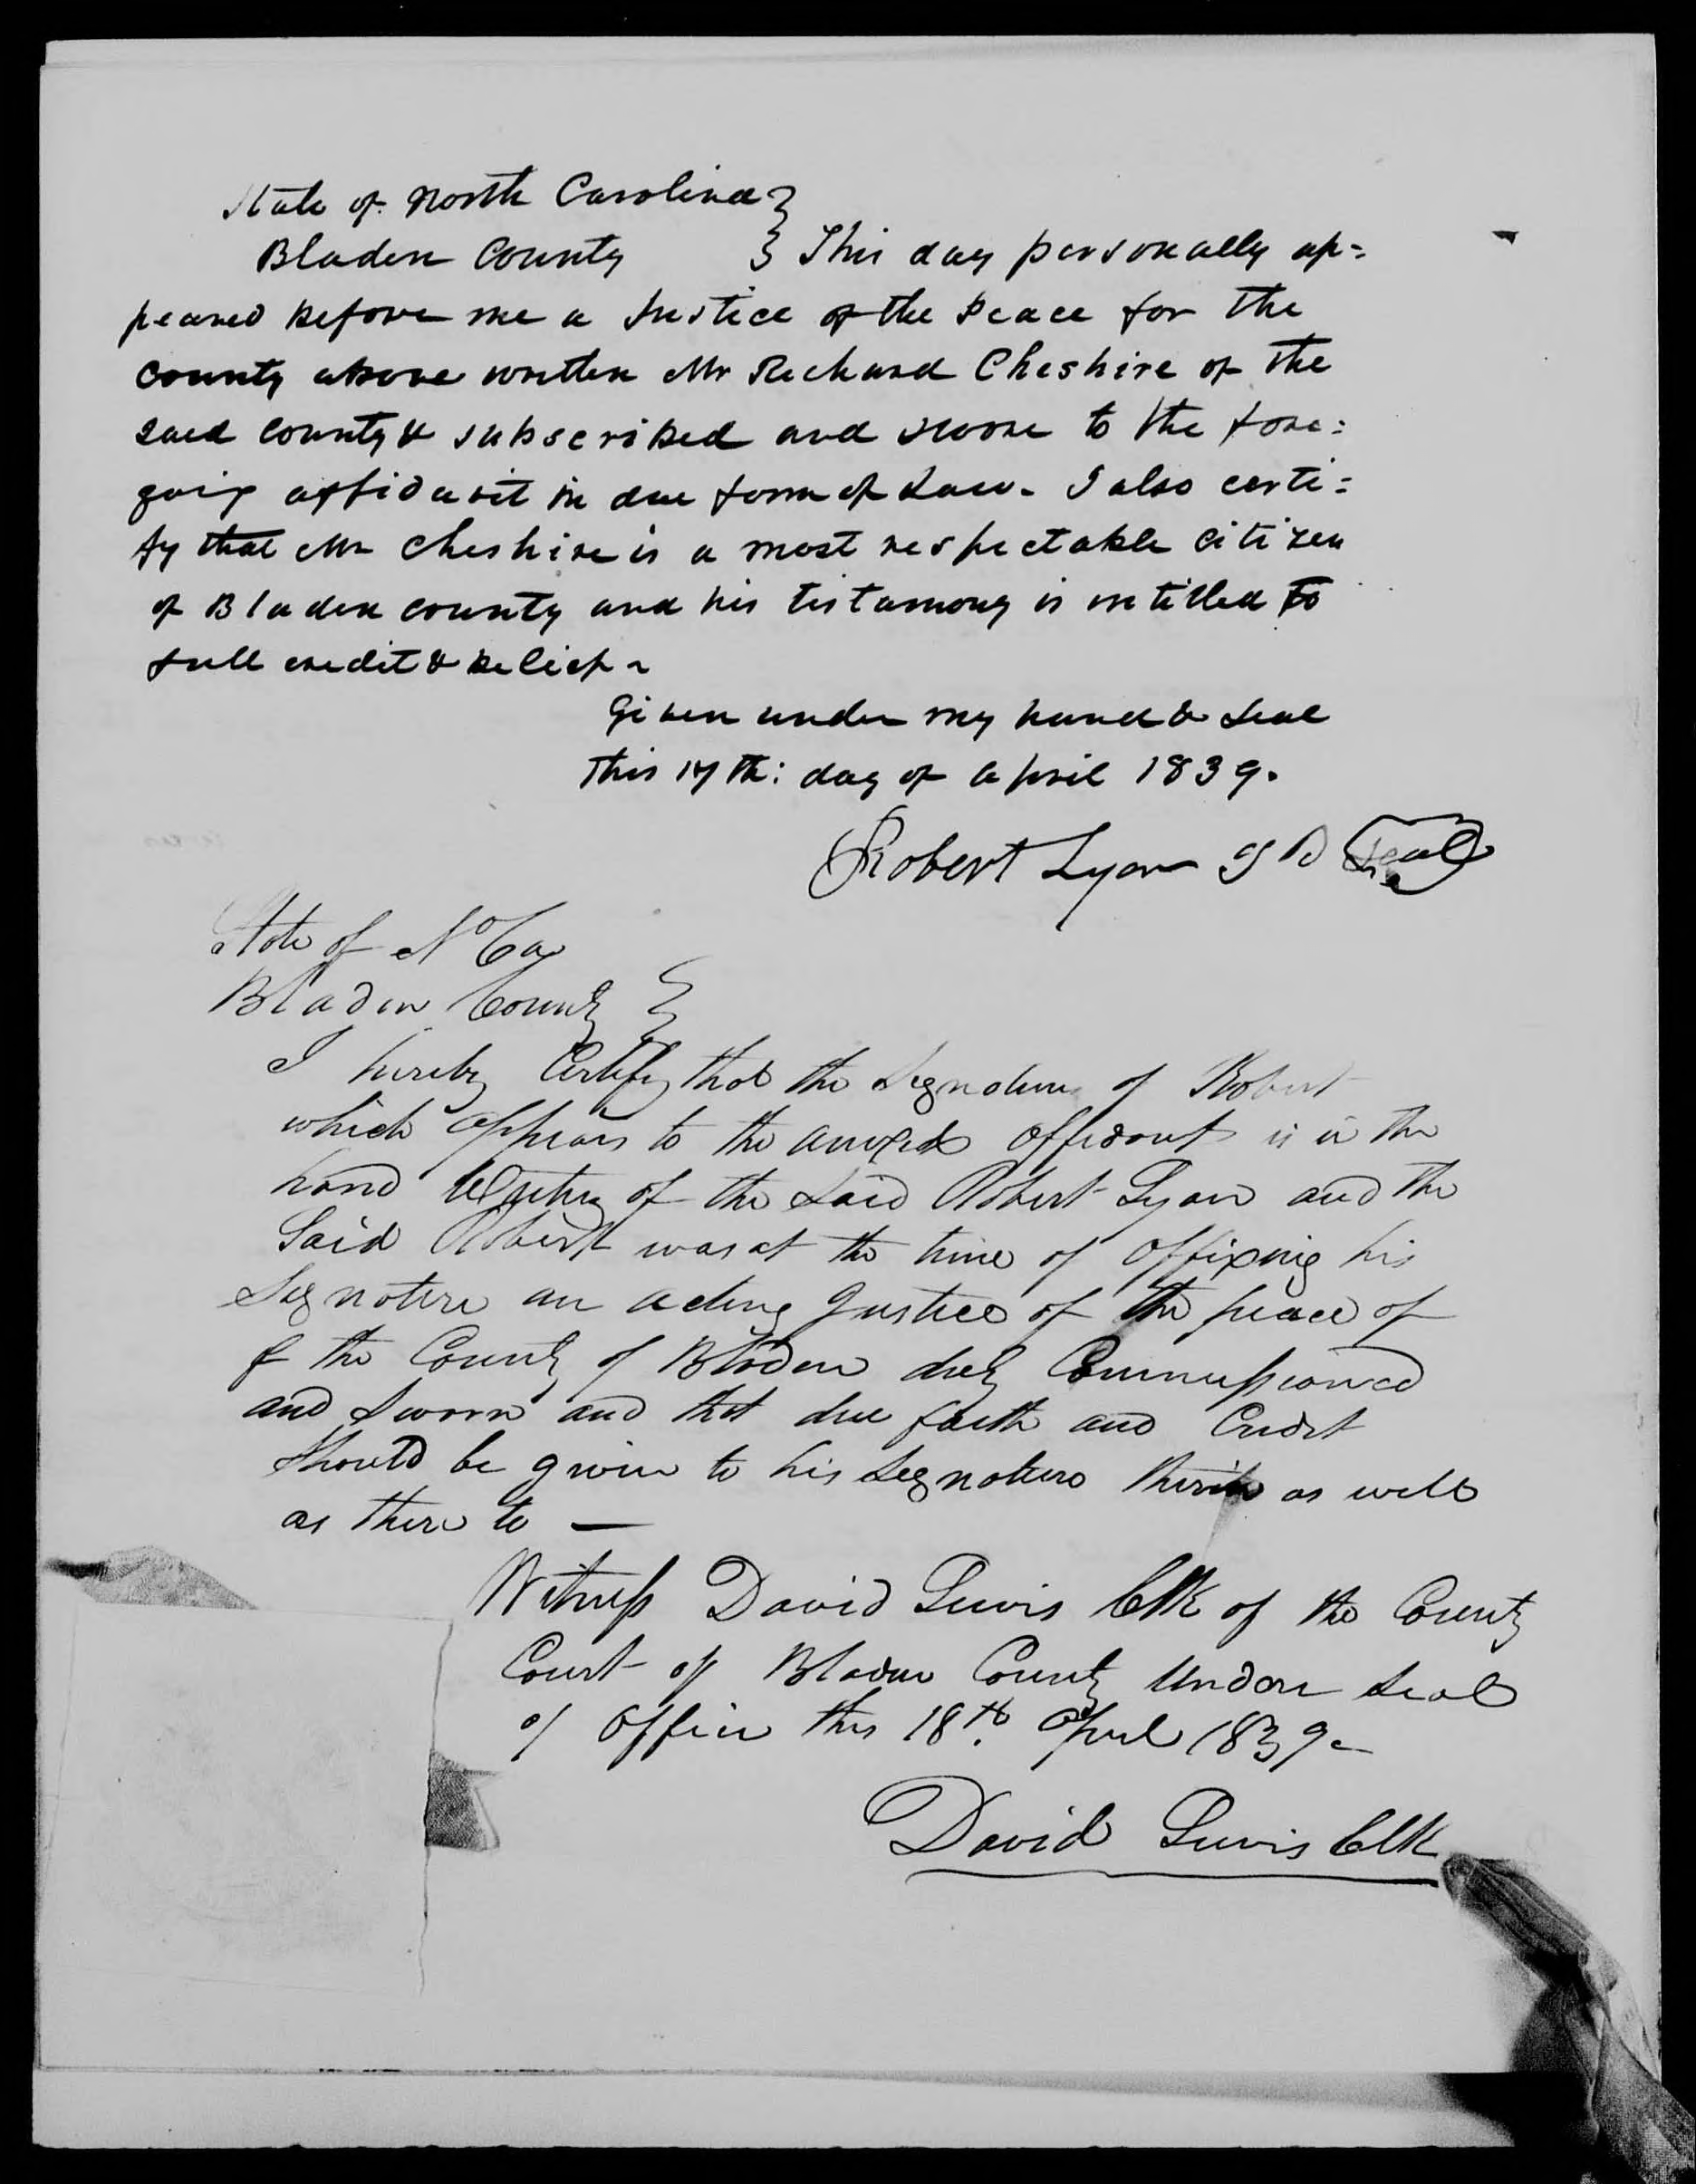 Affidavit of Richard Cheshire in support of a Pension Claim for Lucy Brown, 17 April 1839, page 2